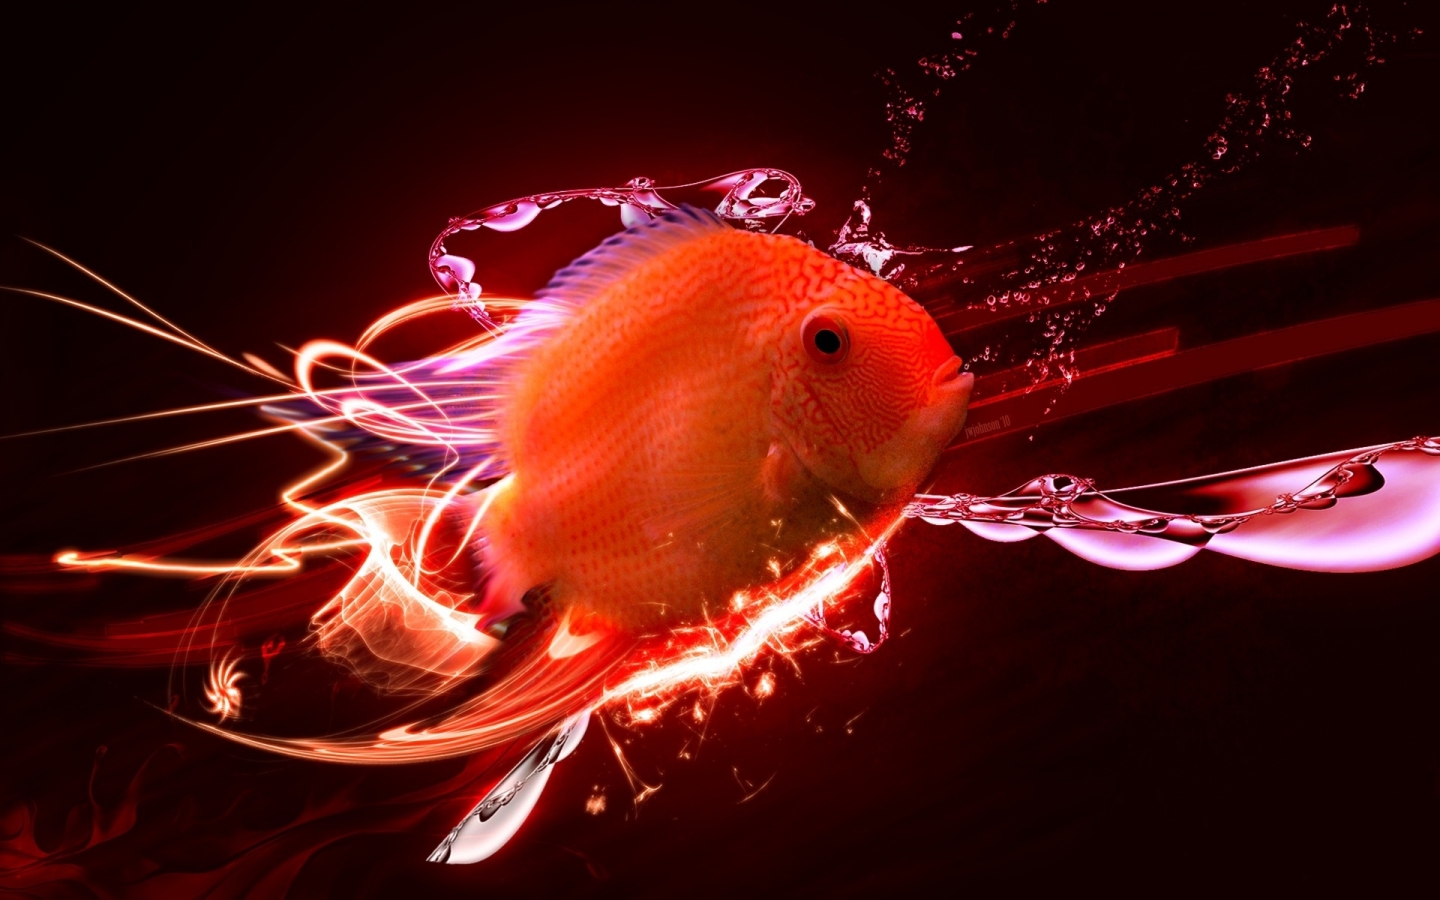 Red fish for 1440 x 900 widescreen resolution